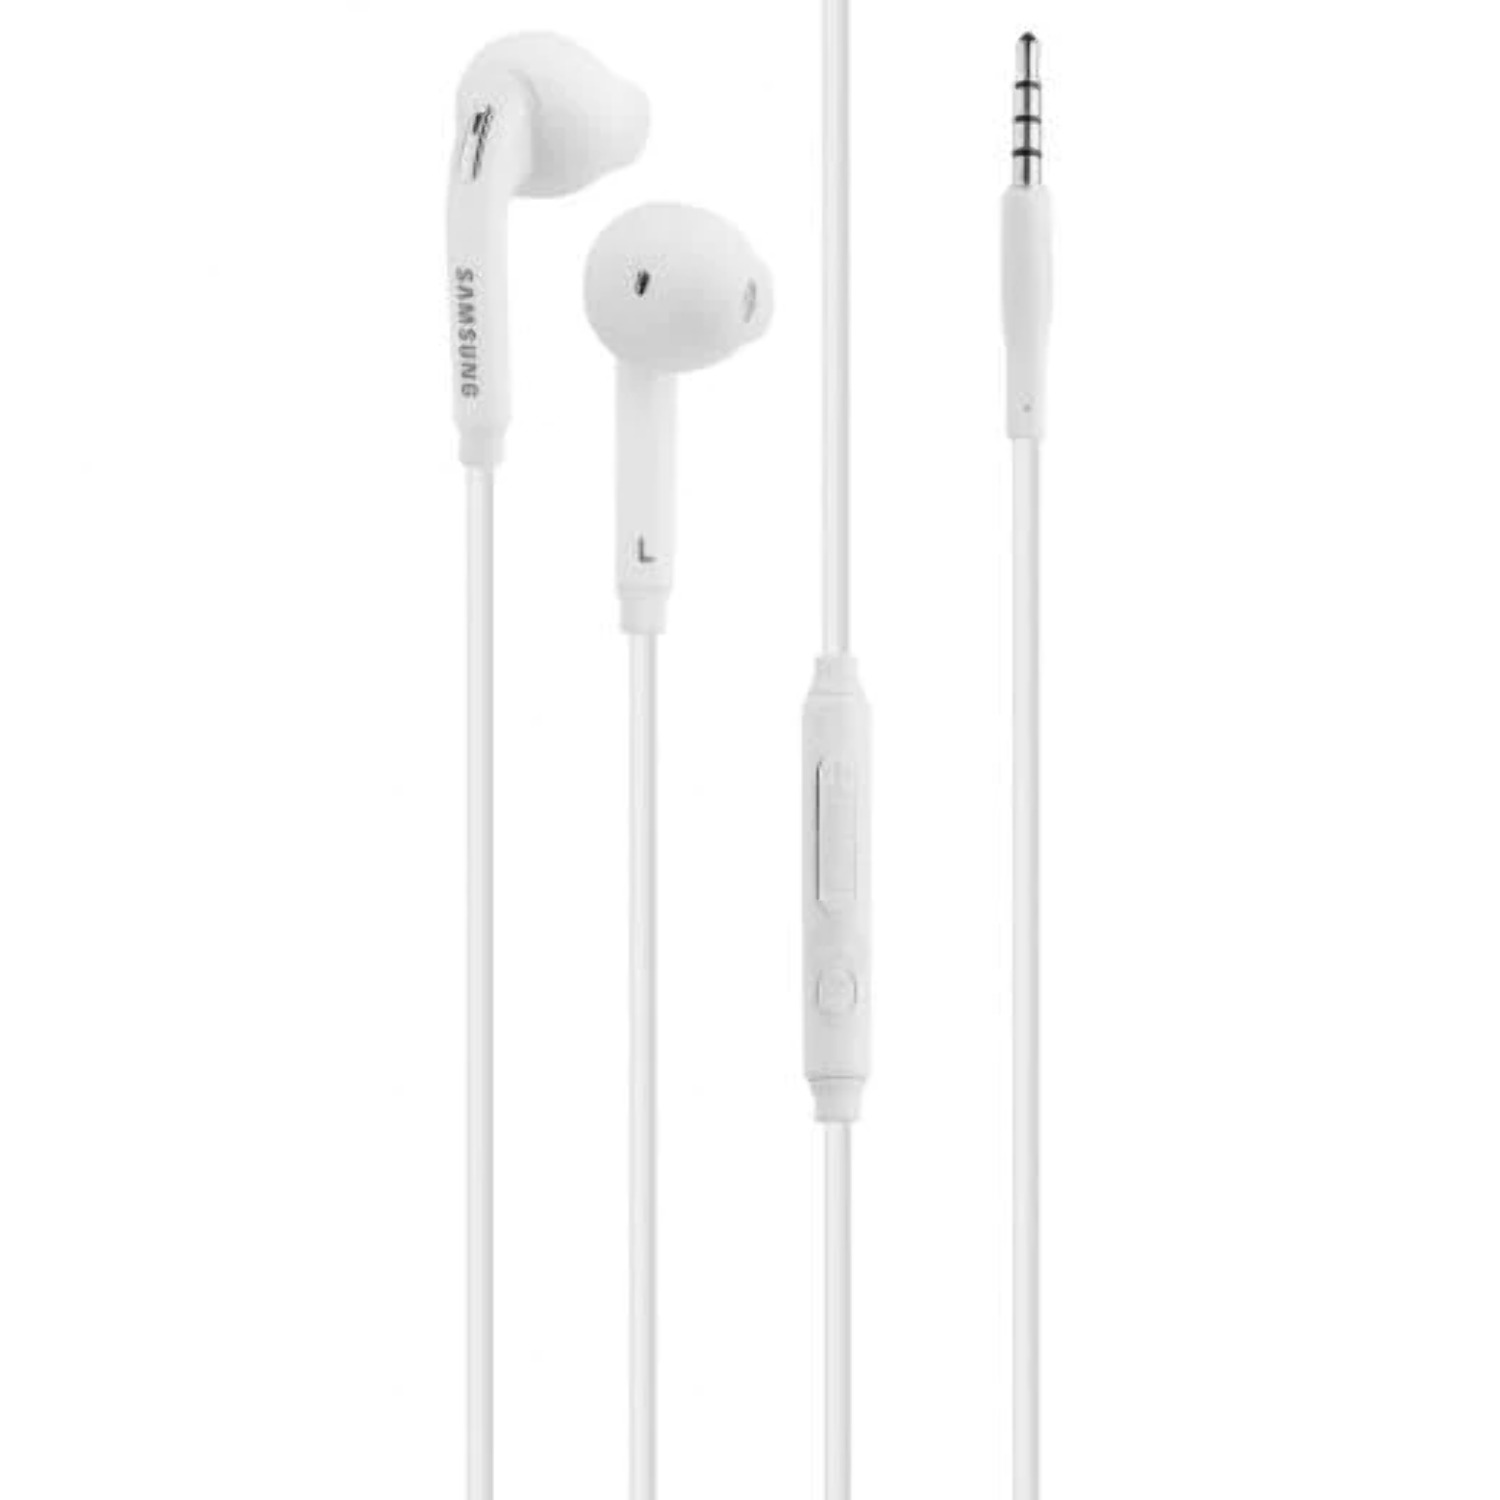 Premium Wired Headset 3.5mm Earbud Stereo In-Ear Headphones with in-line Remote & Microphone Compatible with Samsung Galaxy Fame - image 1 of 1